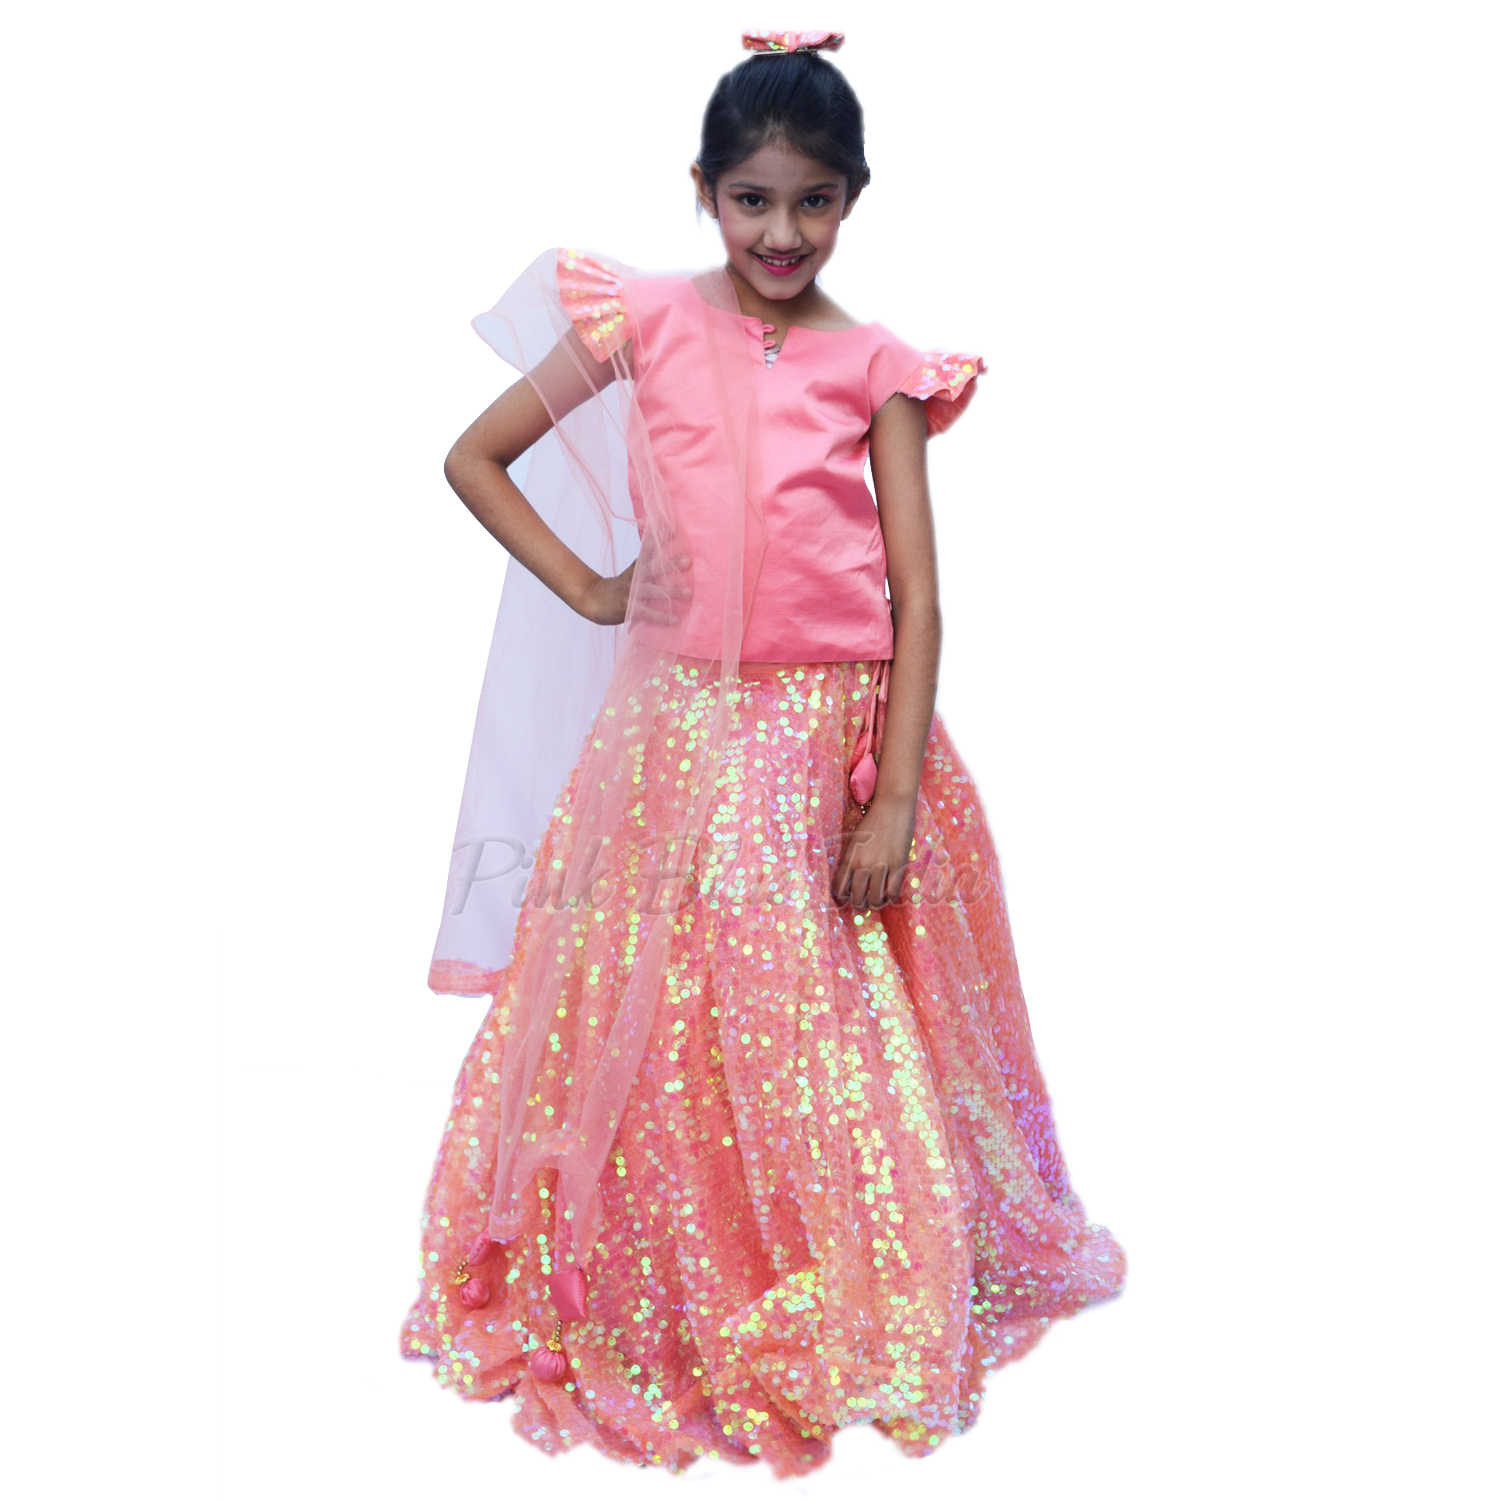 Dress Her Up in These 10 Heartbreakingly Adorable Lehengas for Baby Girl  with Beautiful Accessories to